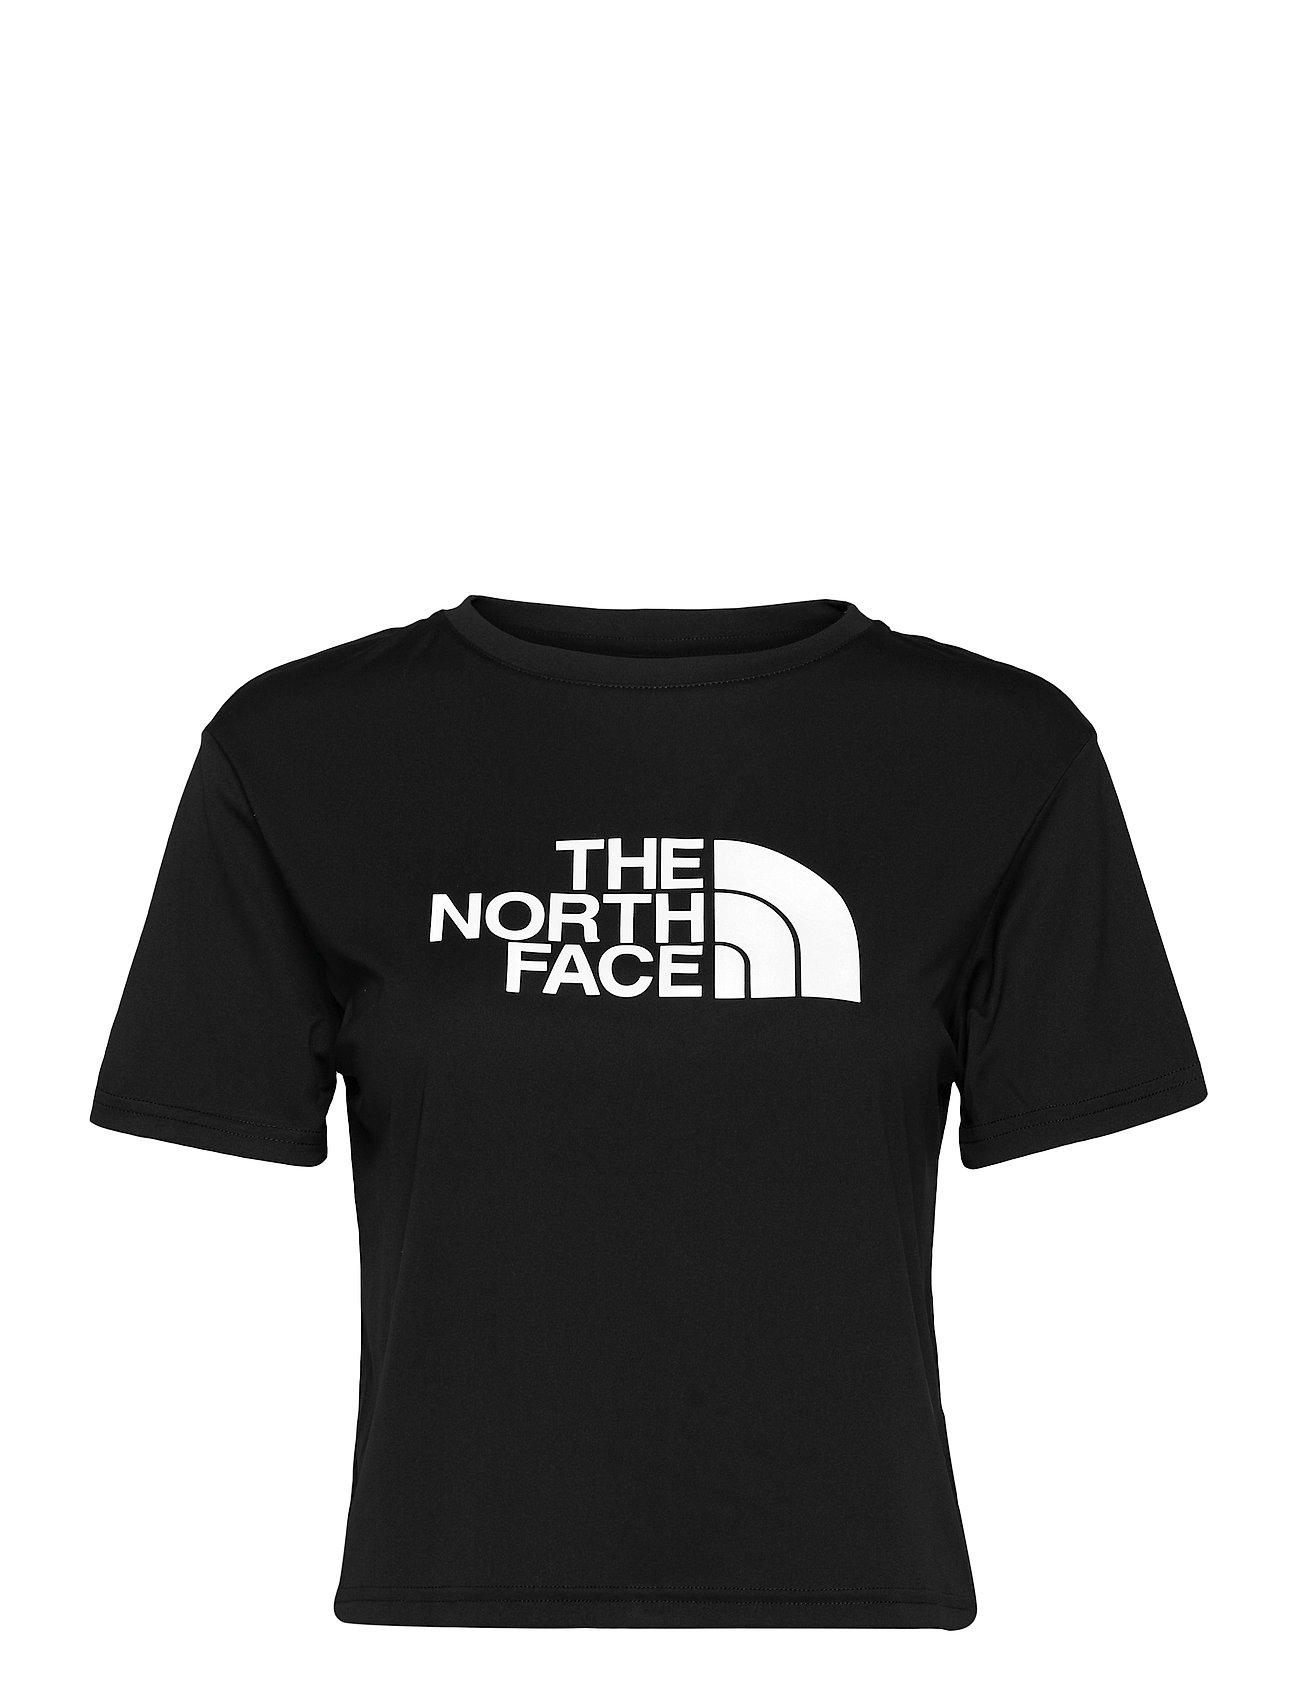 W Ma Tee - Eu T-shirts & Tops Short-sleeved Musta The North Face